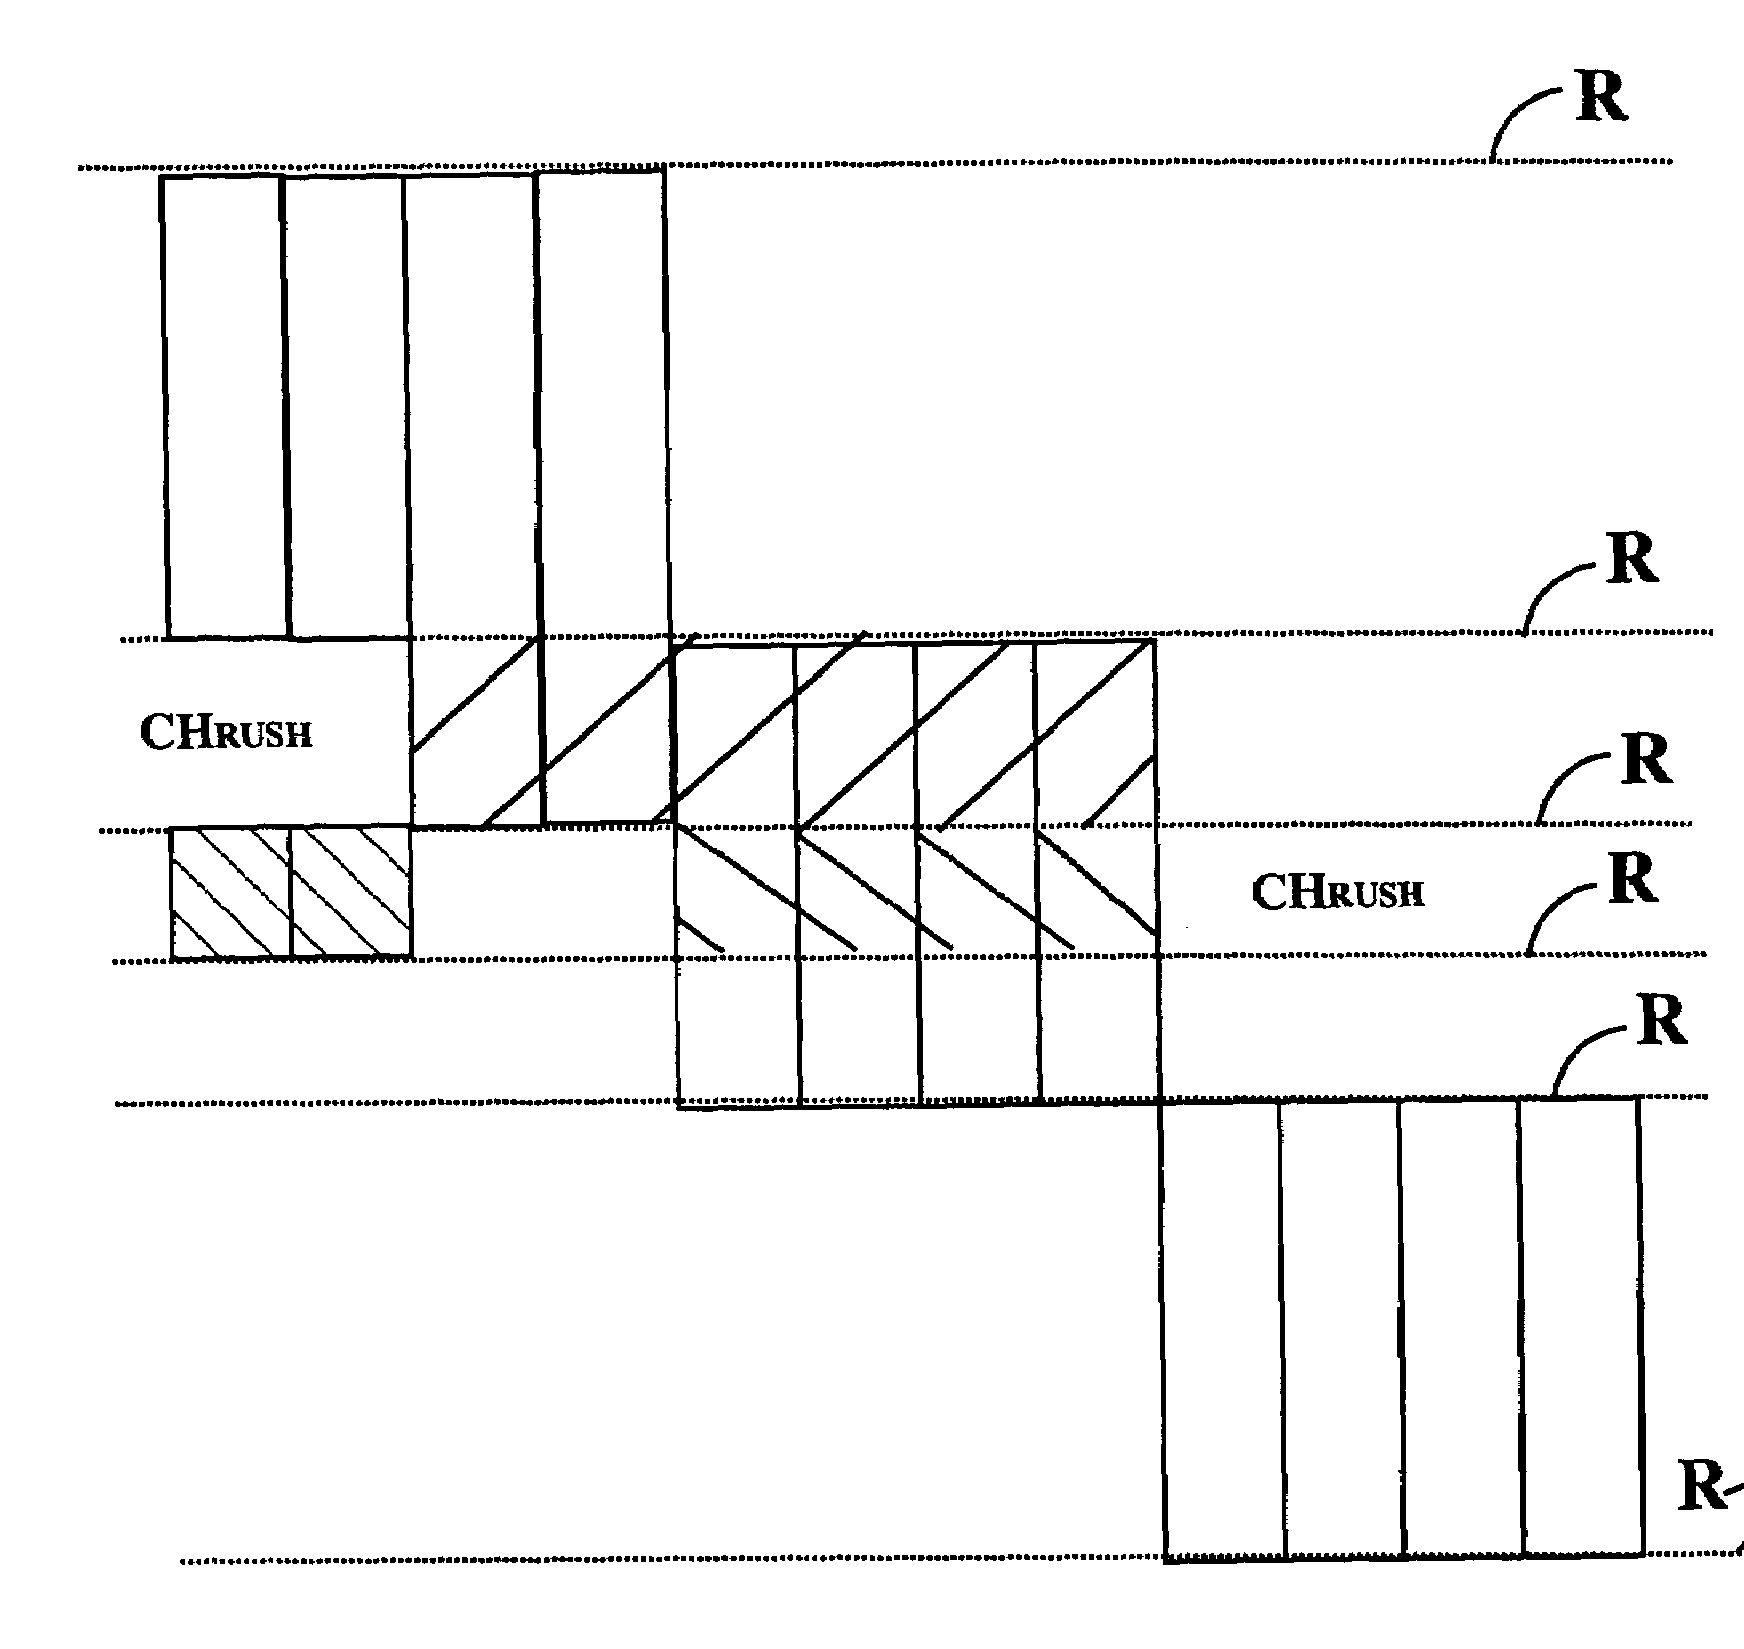 Method for controlling the elevators in an elevator bank in a building divided into zones